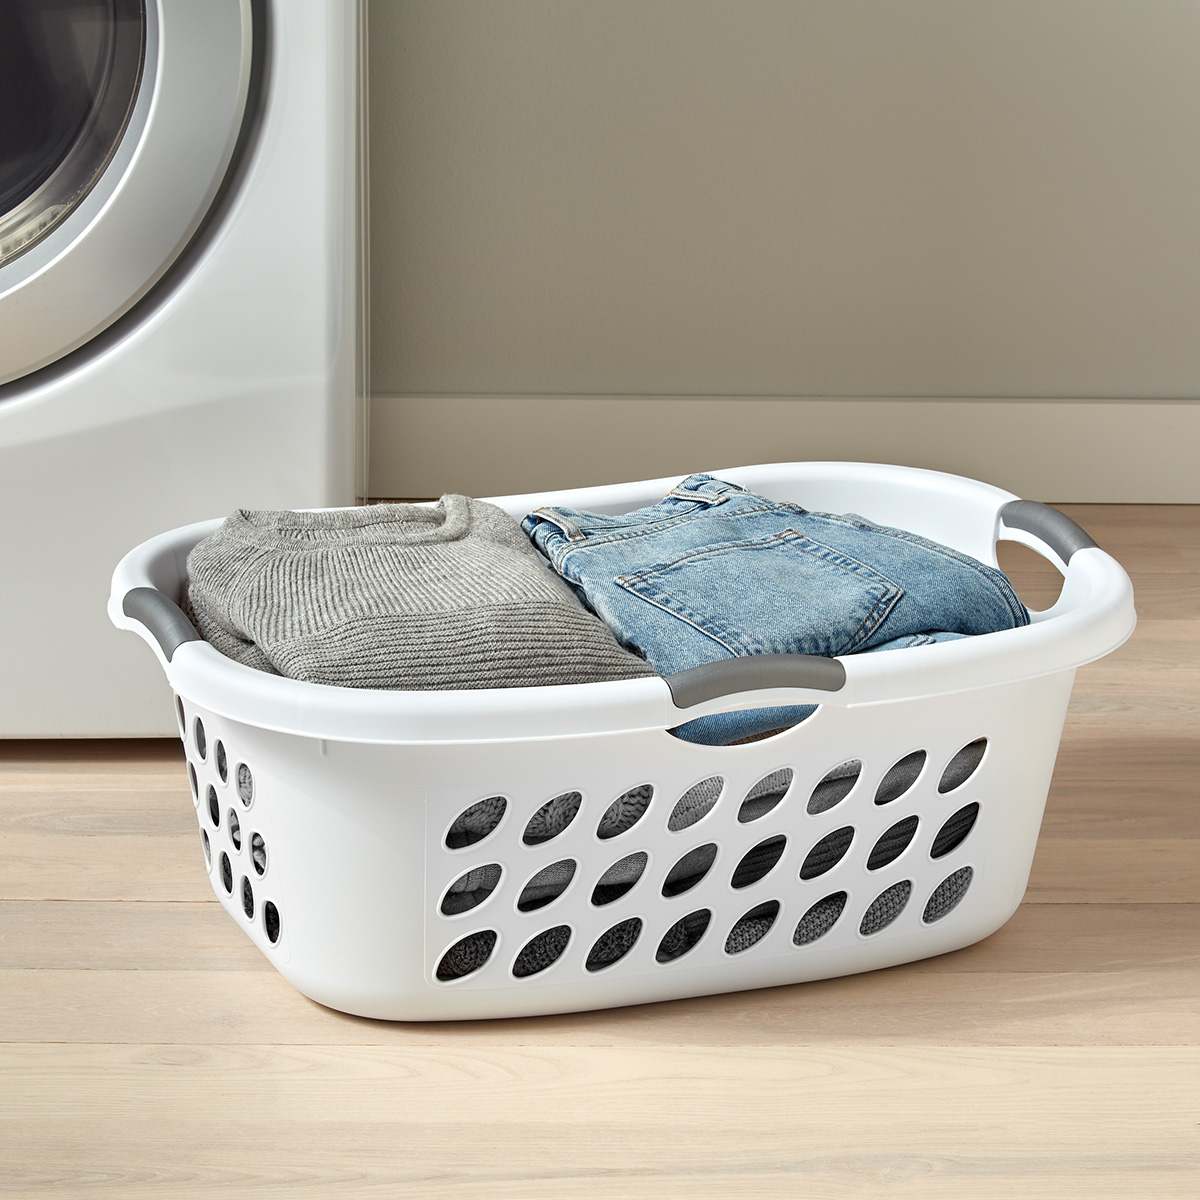 Sterilite Ultra HipHold Laundry Basket | The Container Store